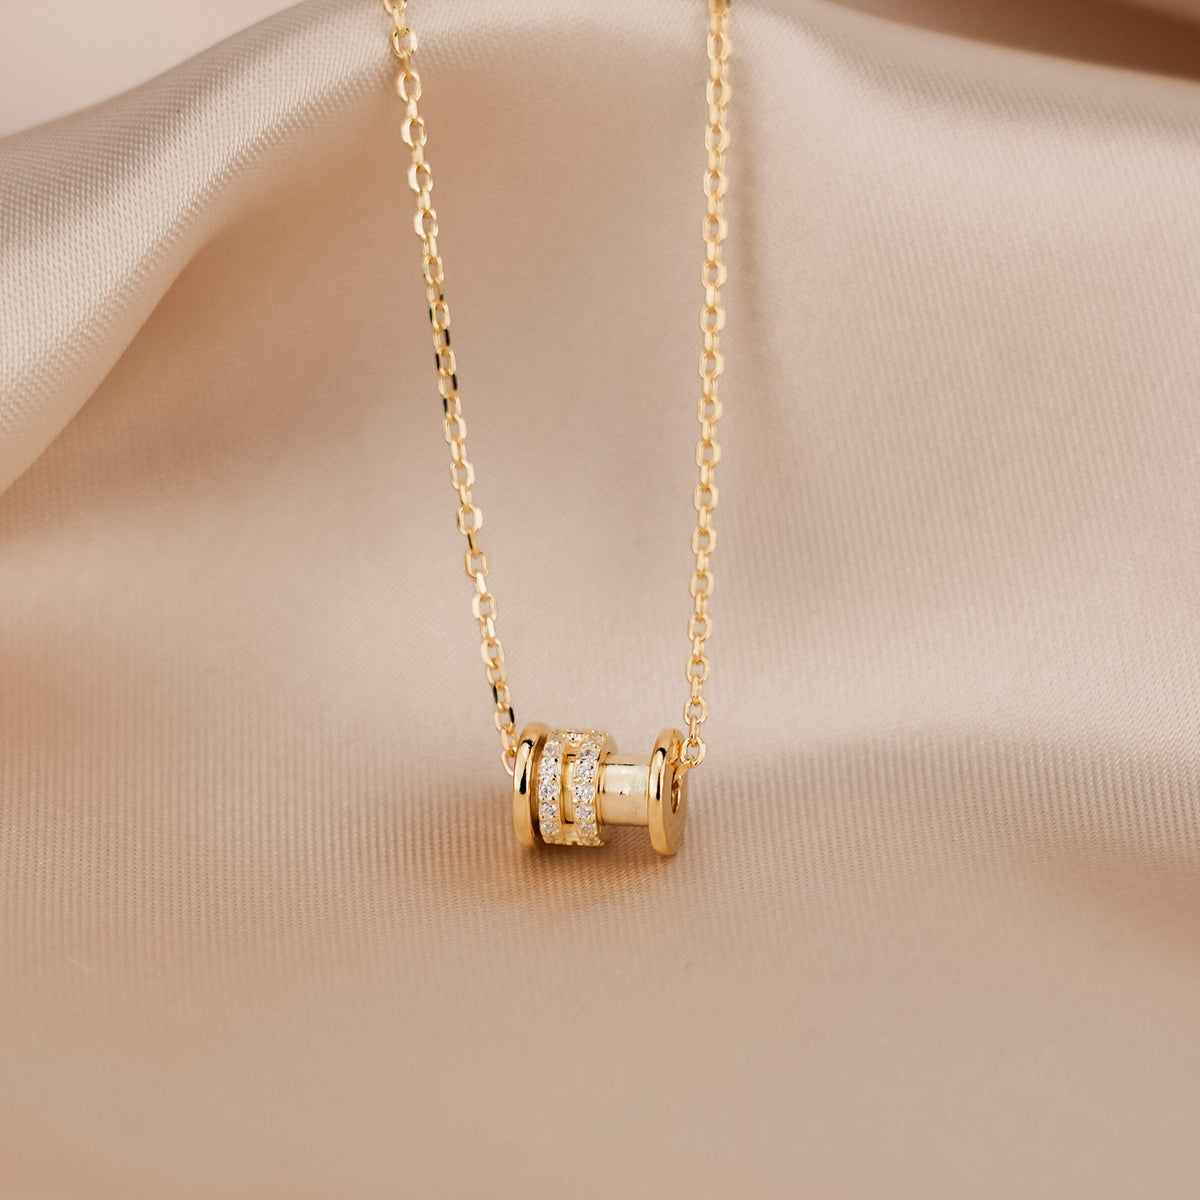 the astral necklace is a gold plated necklace with a dainty and elegant barrel pendant attached to a dainty gold chain. 